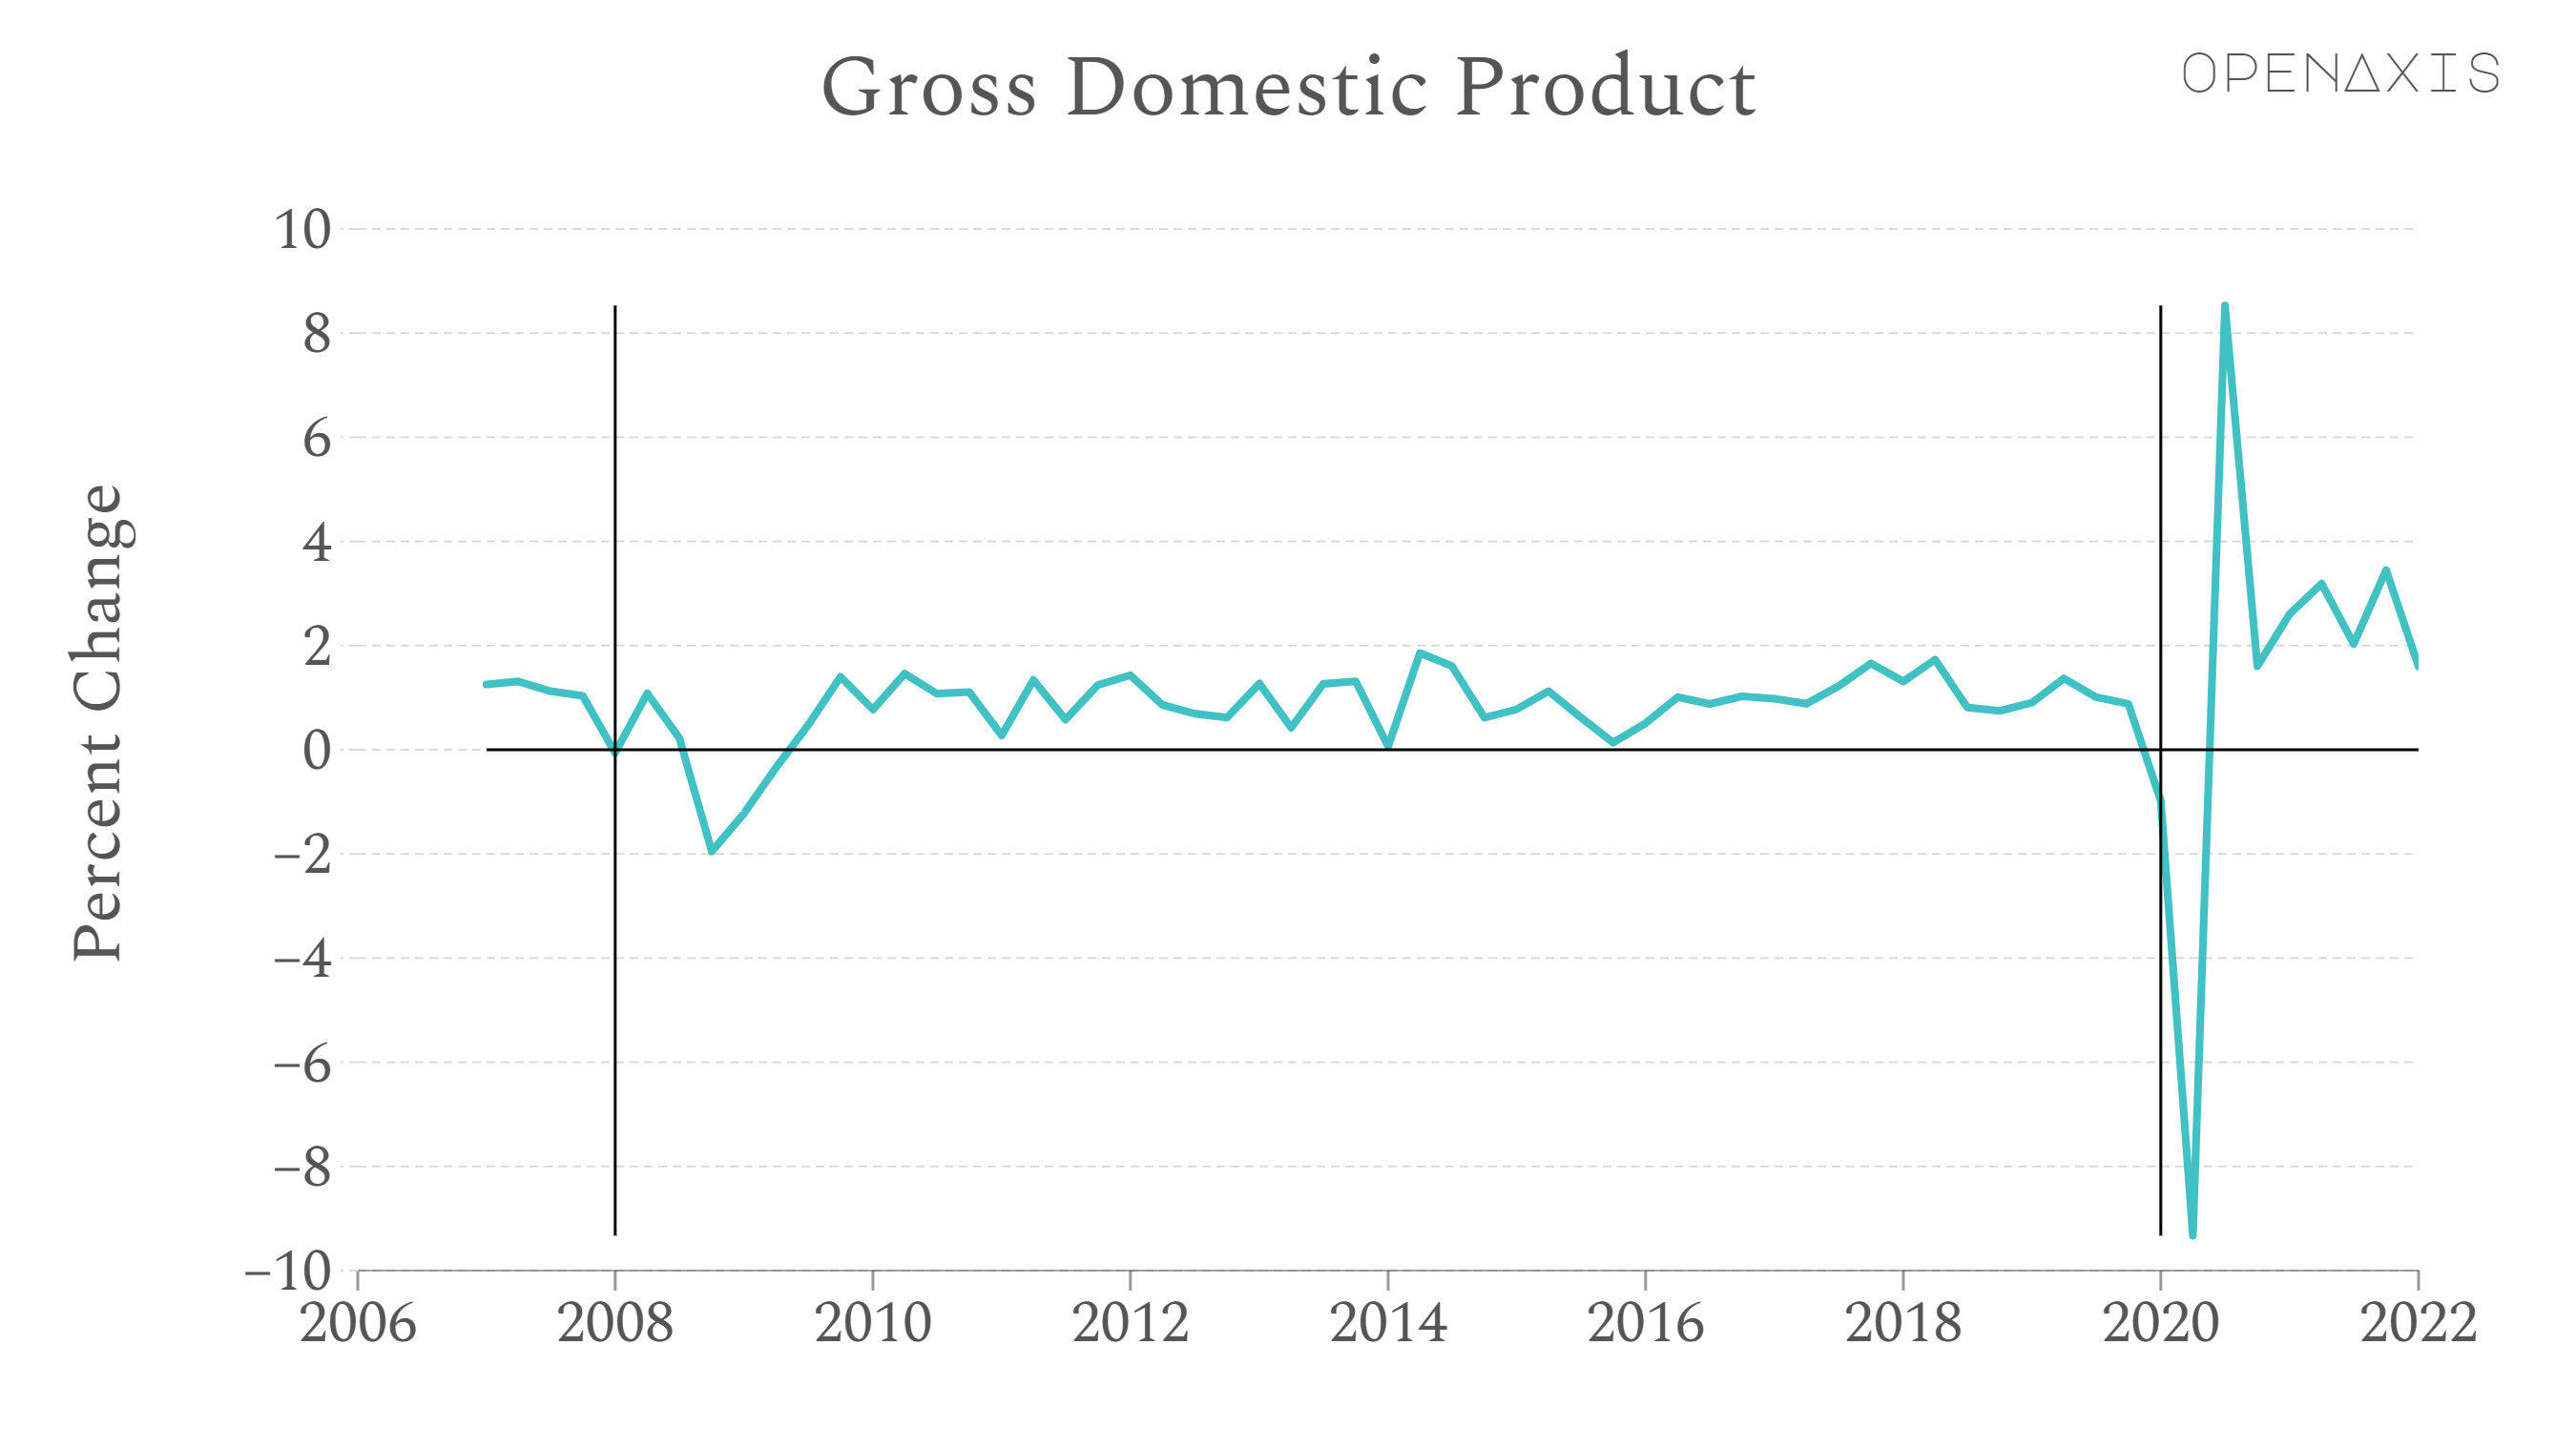 "Gross Domestic Product"